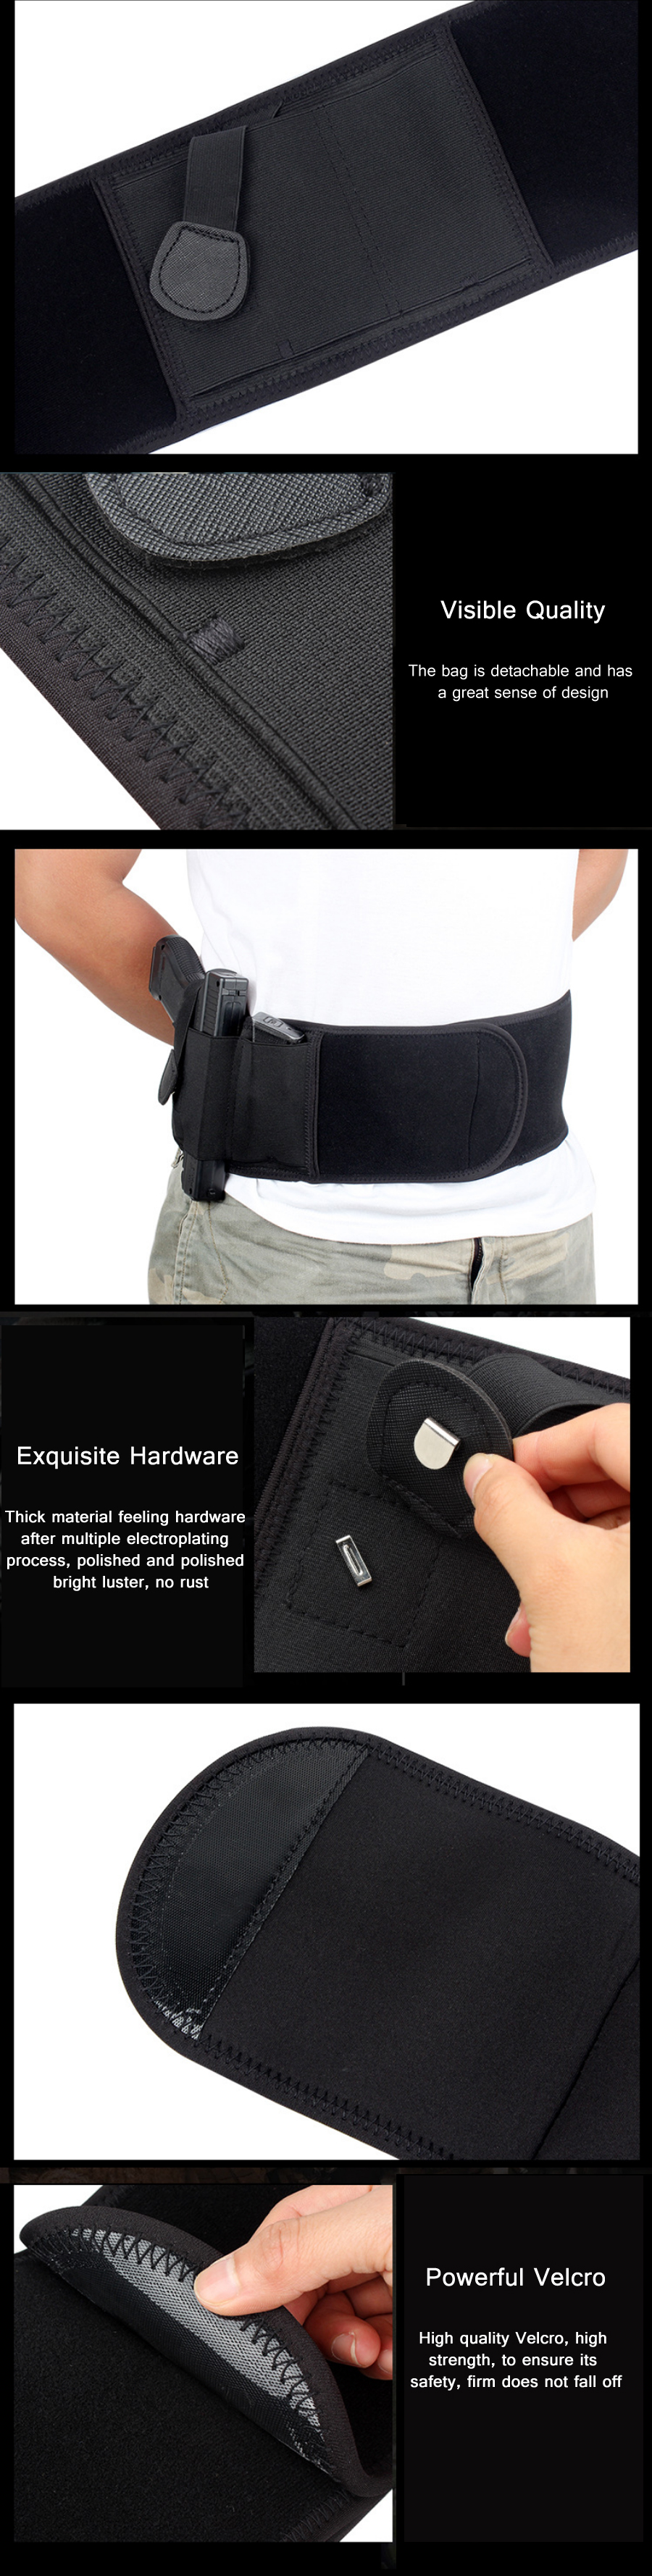 Outdoor-Tactical-Concealed-Waist-Belt-Holster-Universal-Shooting-Sleeves-For-Women-Men-Hunting-Acces-1727350-2